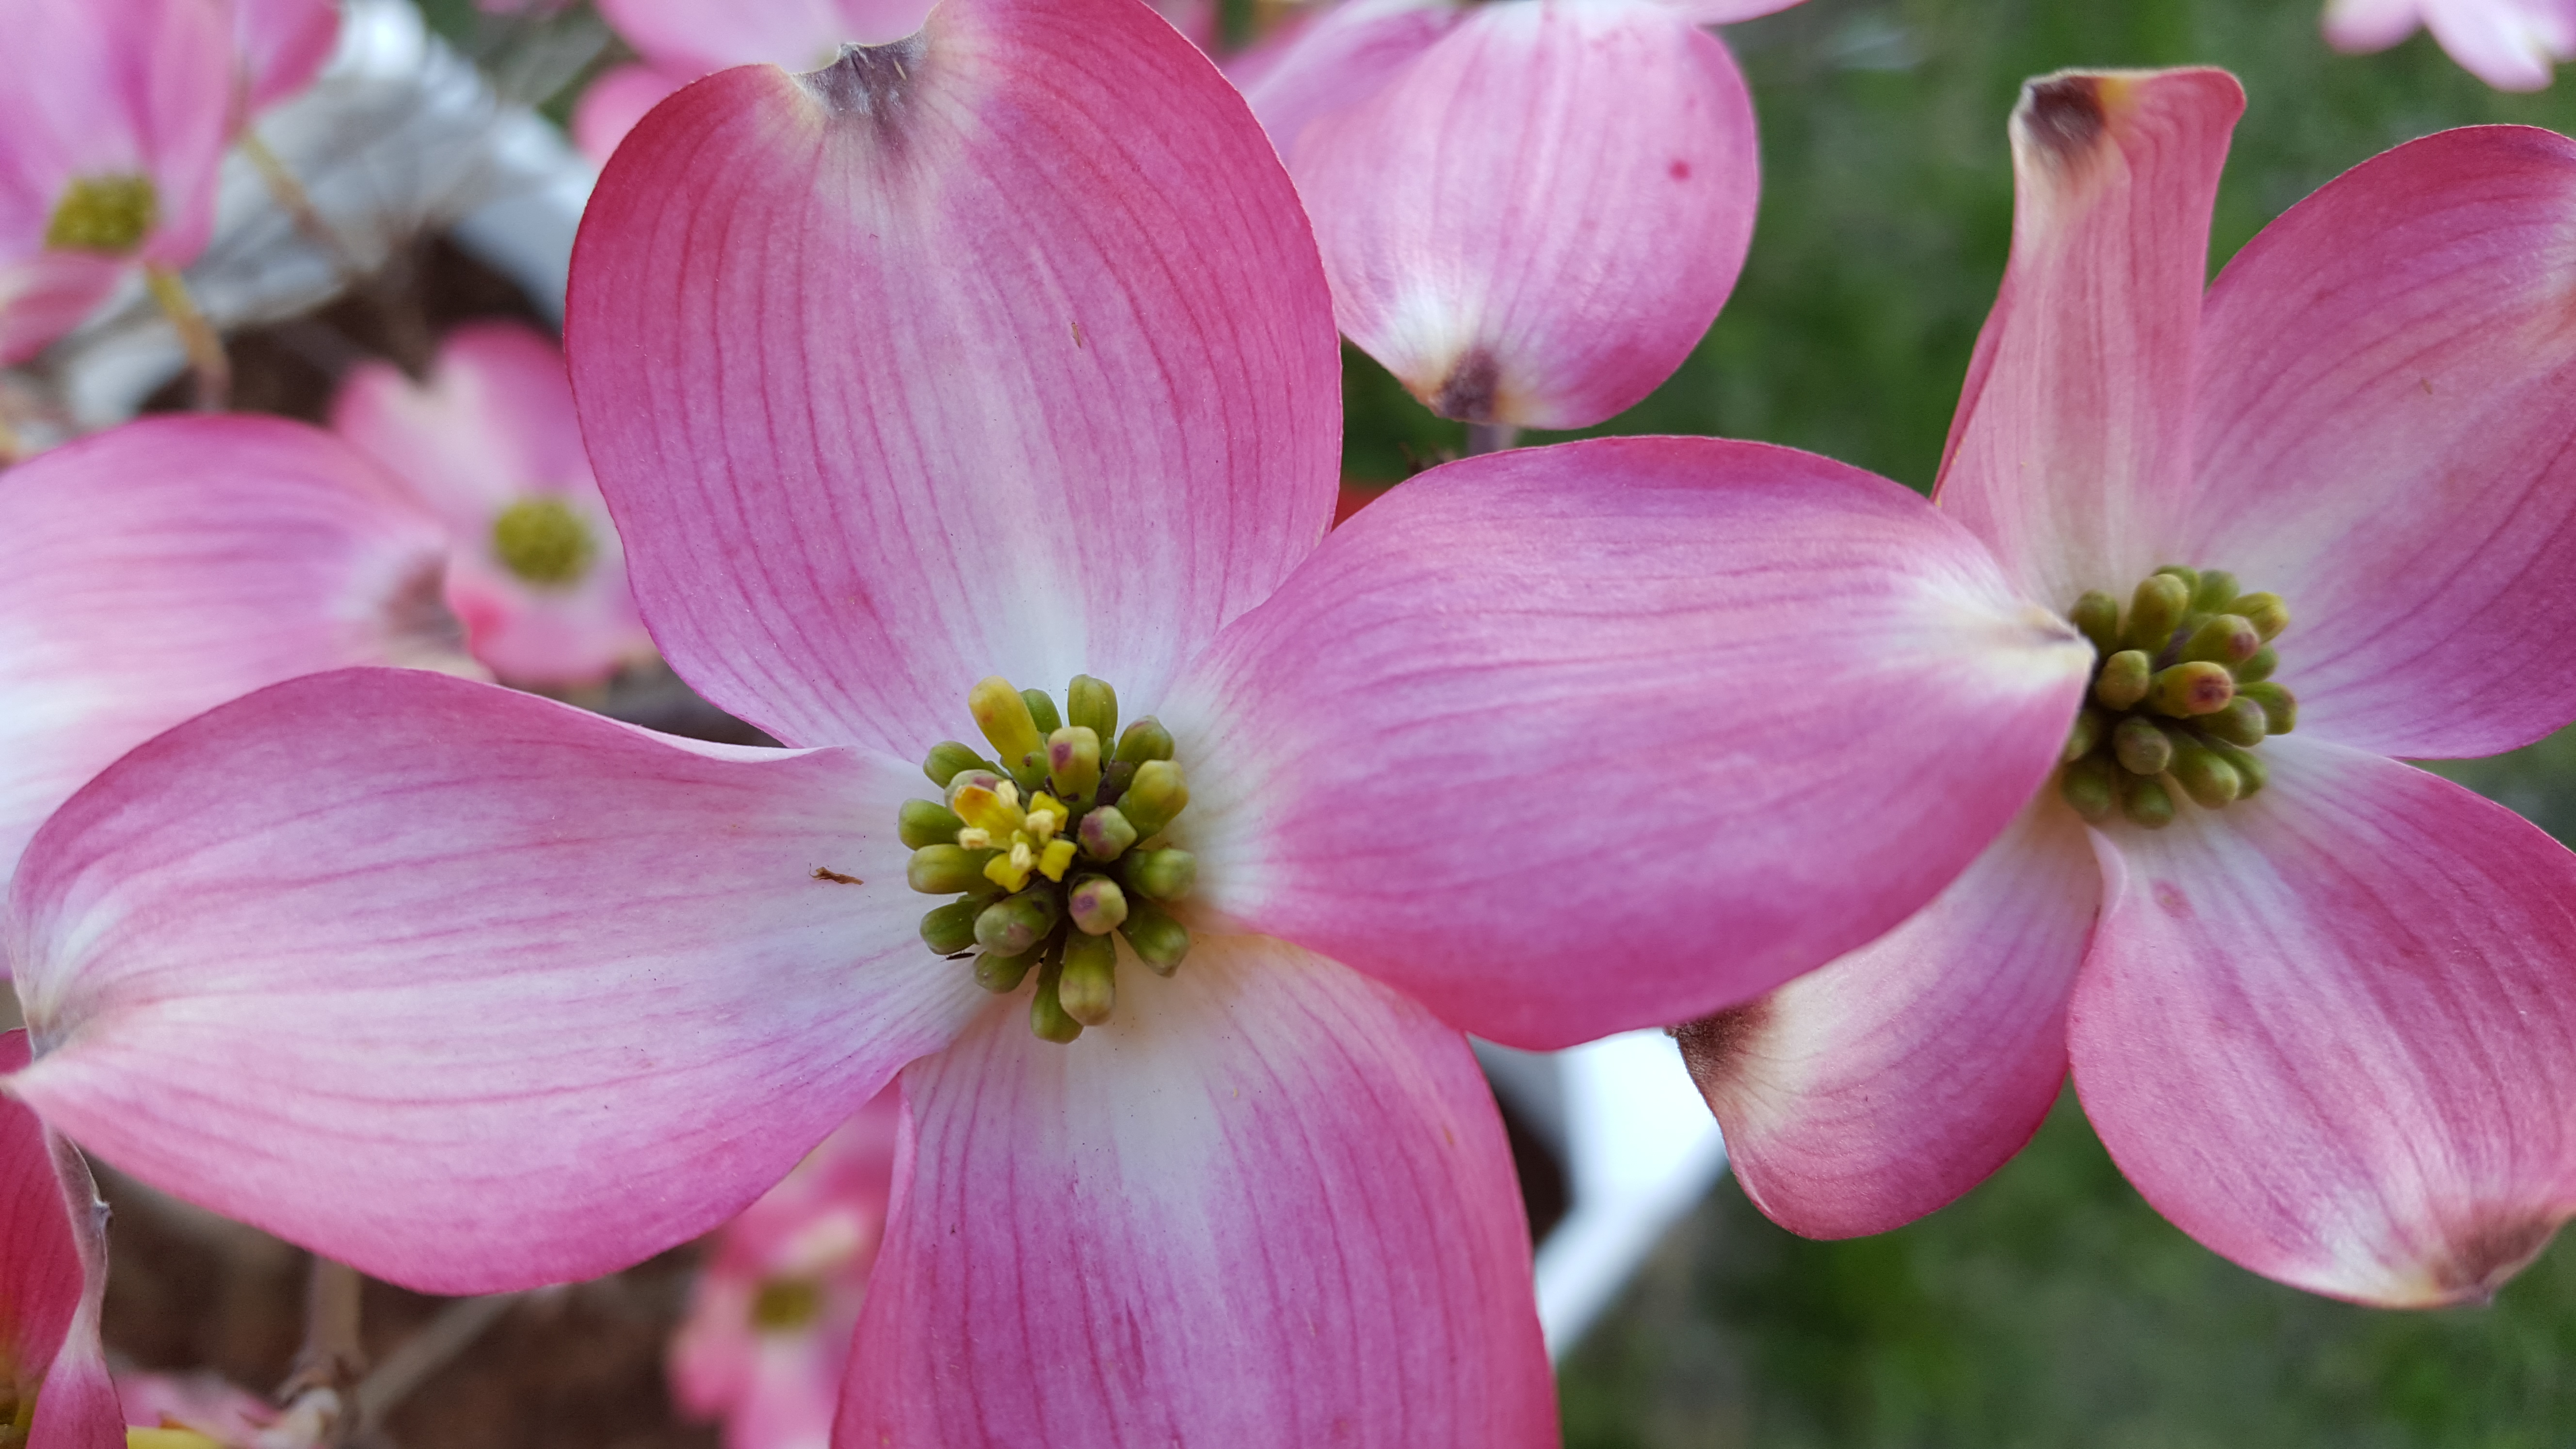 Closeup view of dogwood. Four pink bracts appear like petals. The actual flowers are in the center of the four bracts.